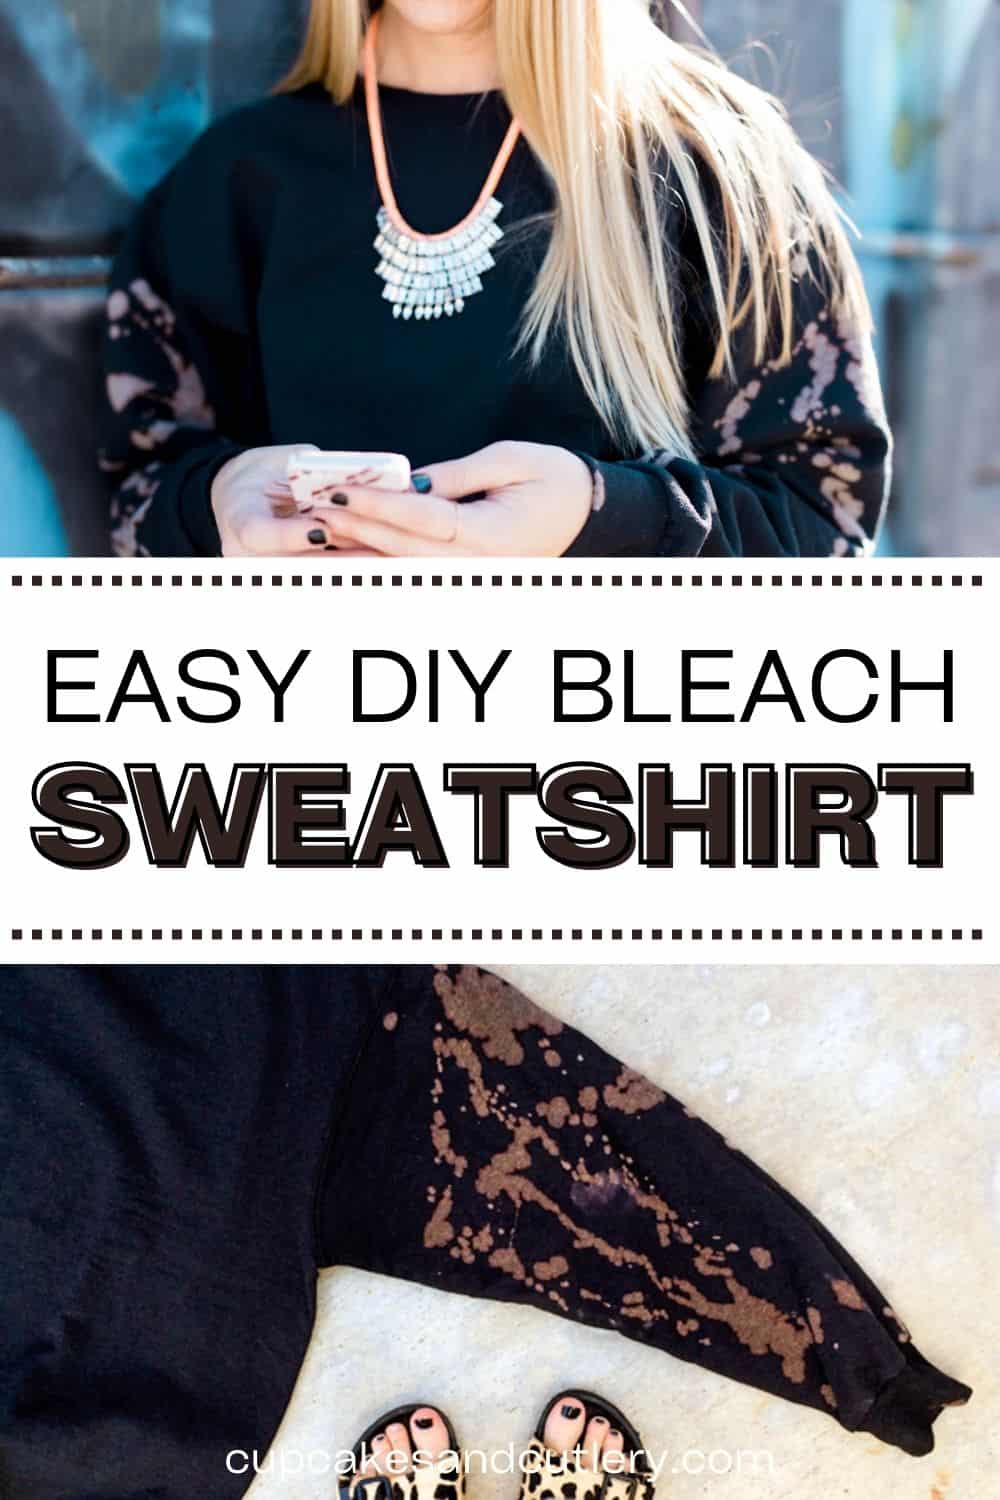 Text: Easy DIY Bleach Sweatshirt with an image of a woman wearing a black sweatshirt with sleeves that look tie-dyed and the sweatshirt laying on the ground.